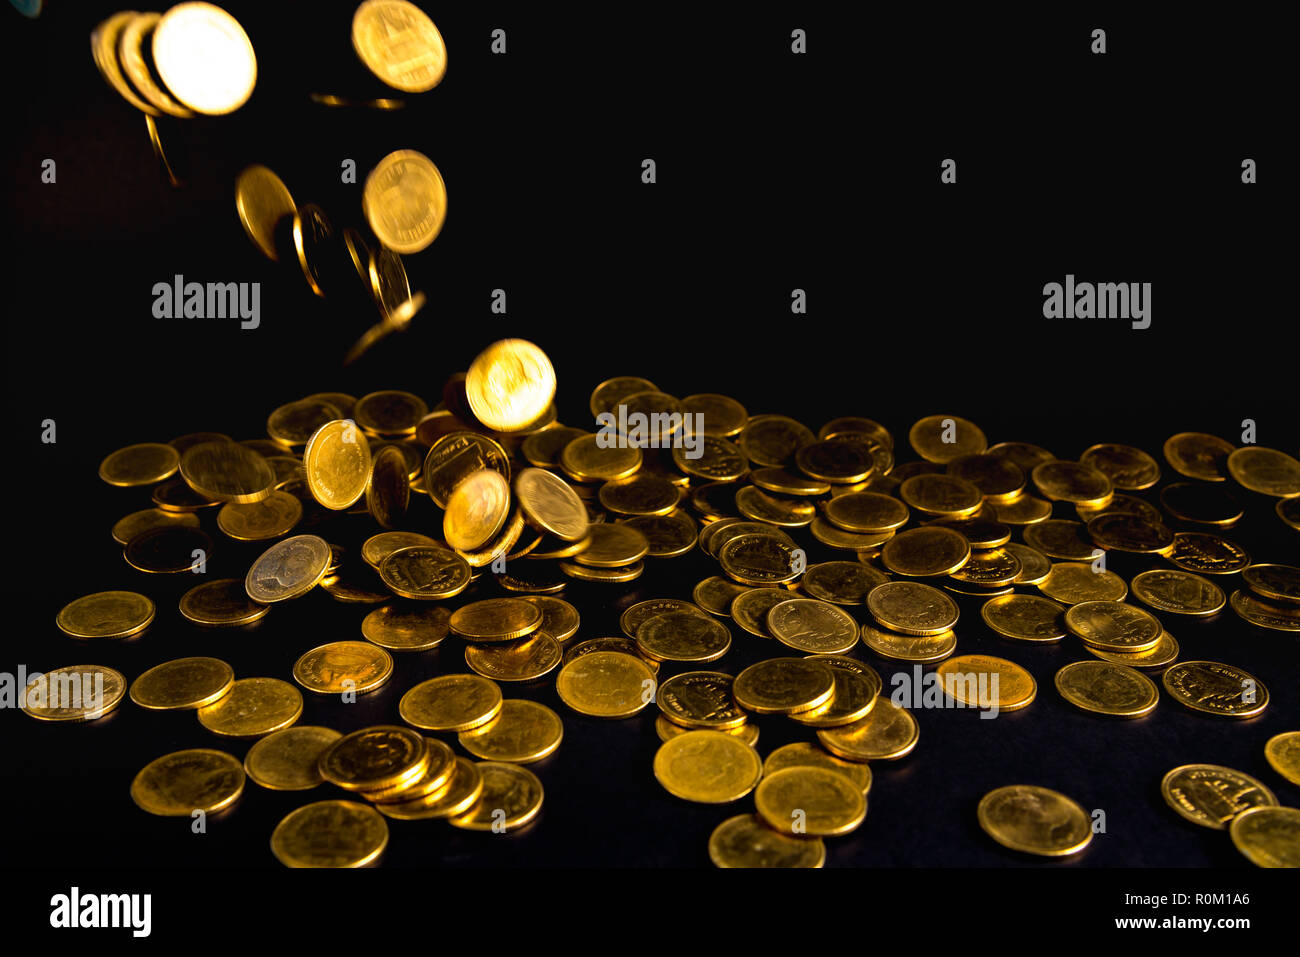 Falling gold coins money in dark background, business concept idea Stock  Photo - Alamy